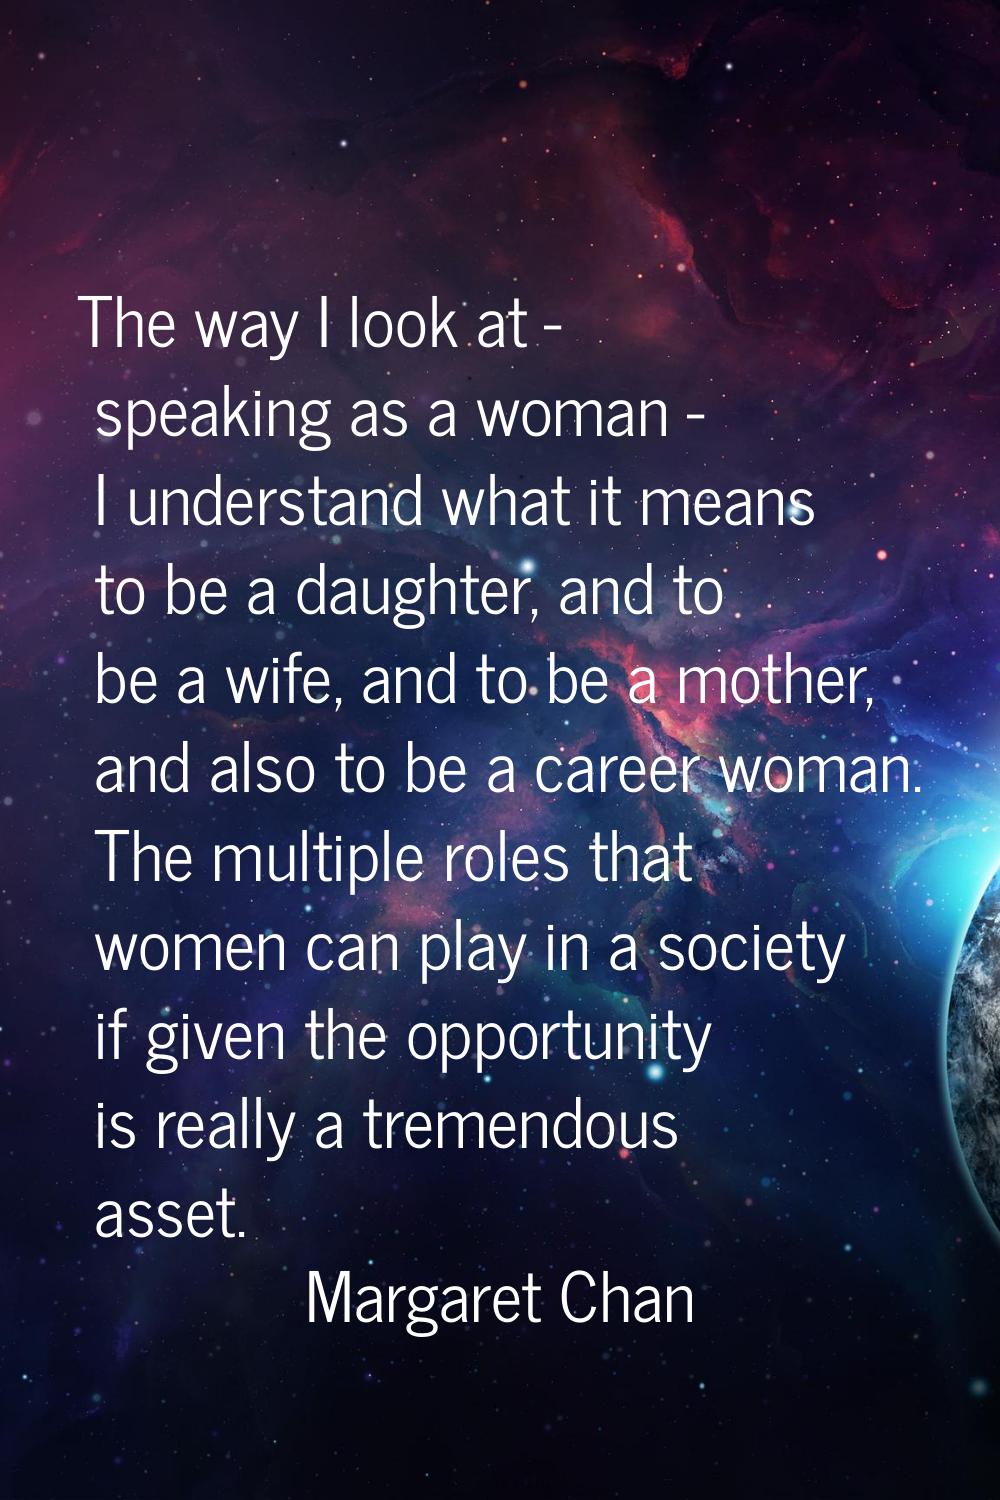 The way I look at - speaking as a woman - I understand what it means to be a daughter, and to be a 